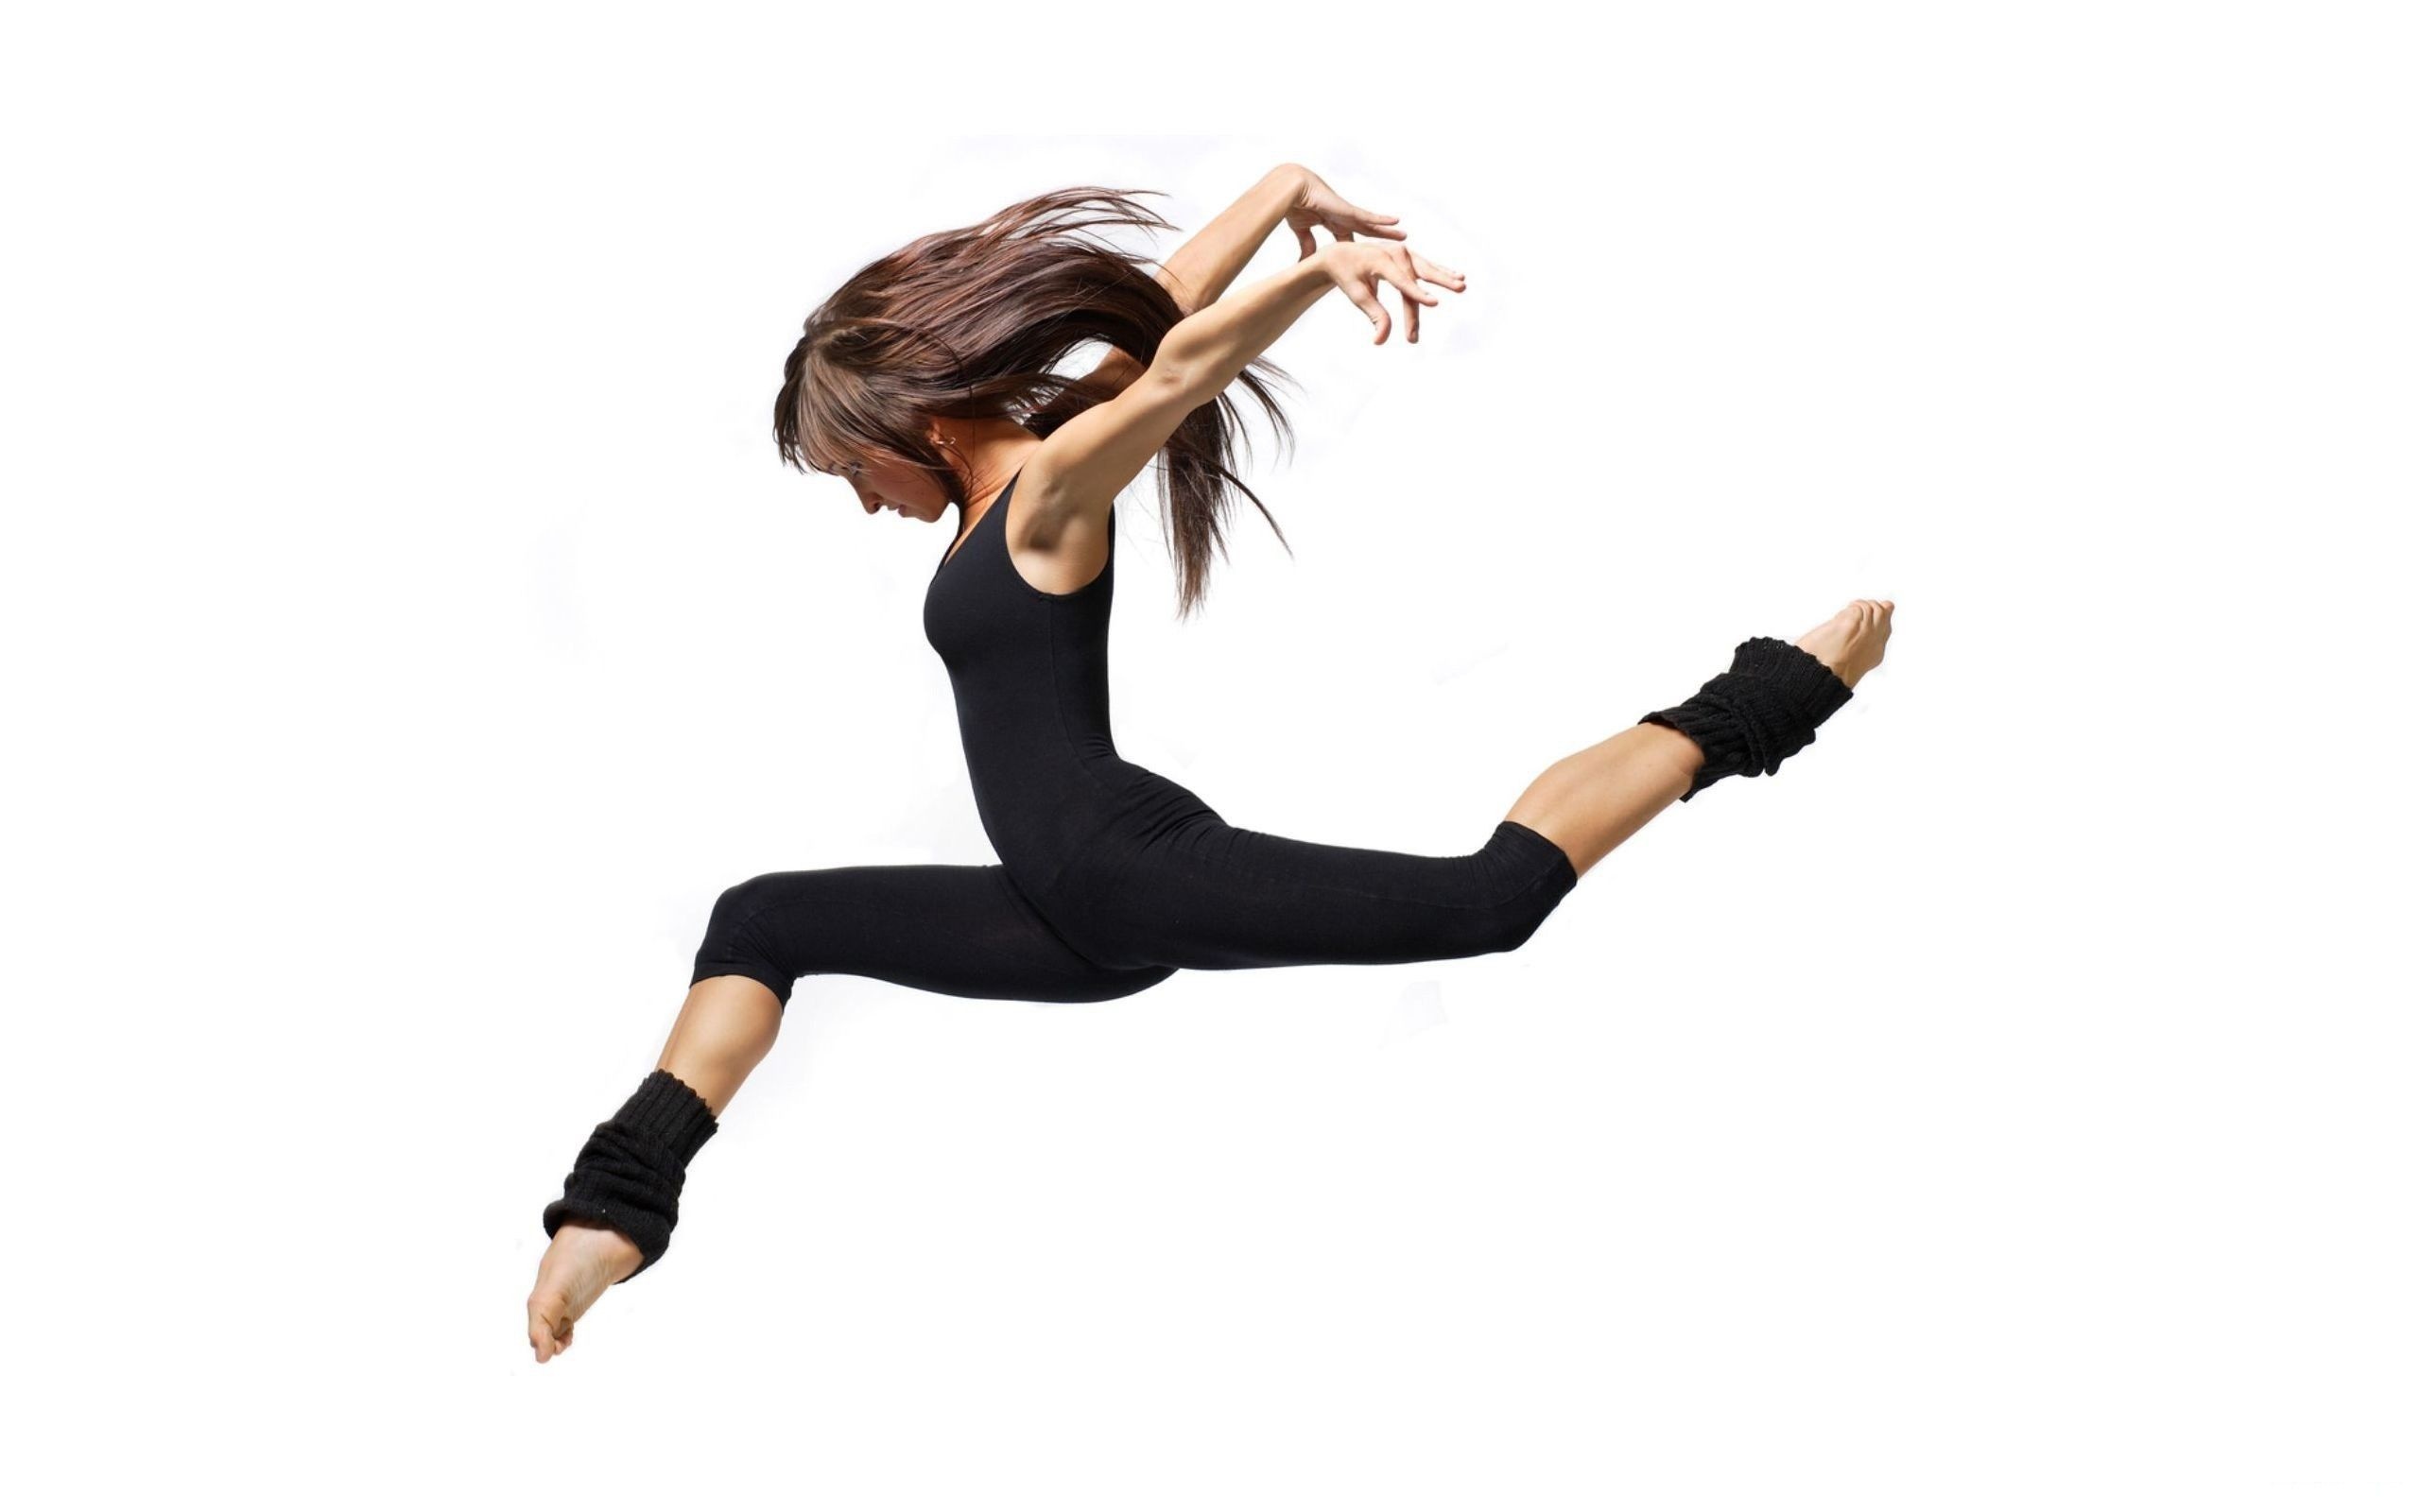 Contemporary Dance: Athletic girl, Gymnastics, The dancer expressing emotionality through movements. 2560x1600 HD Background.